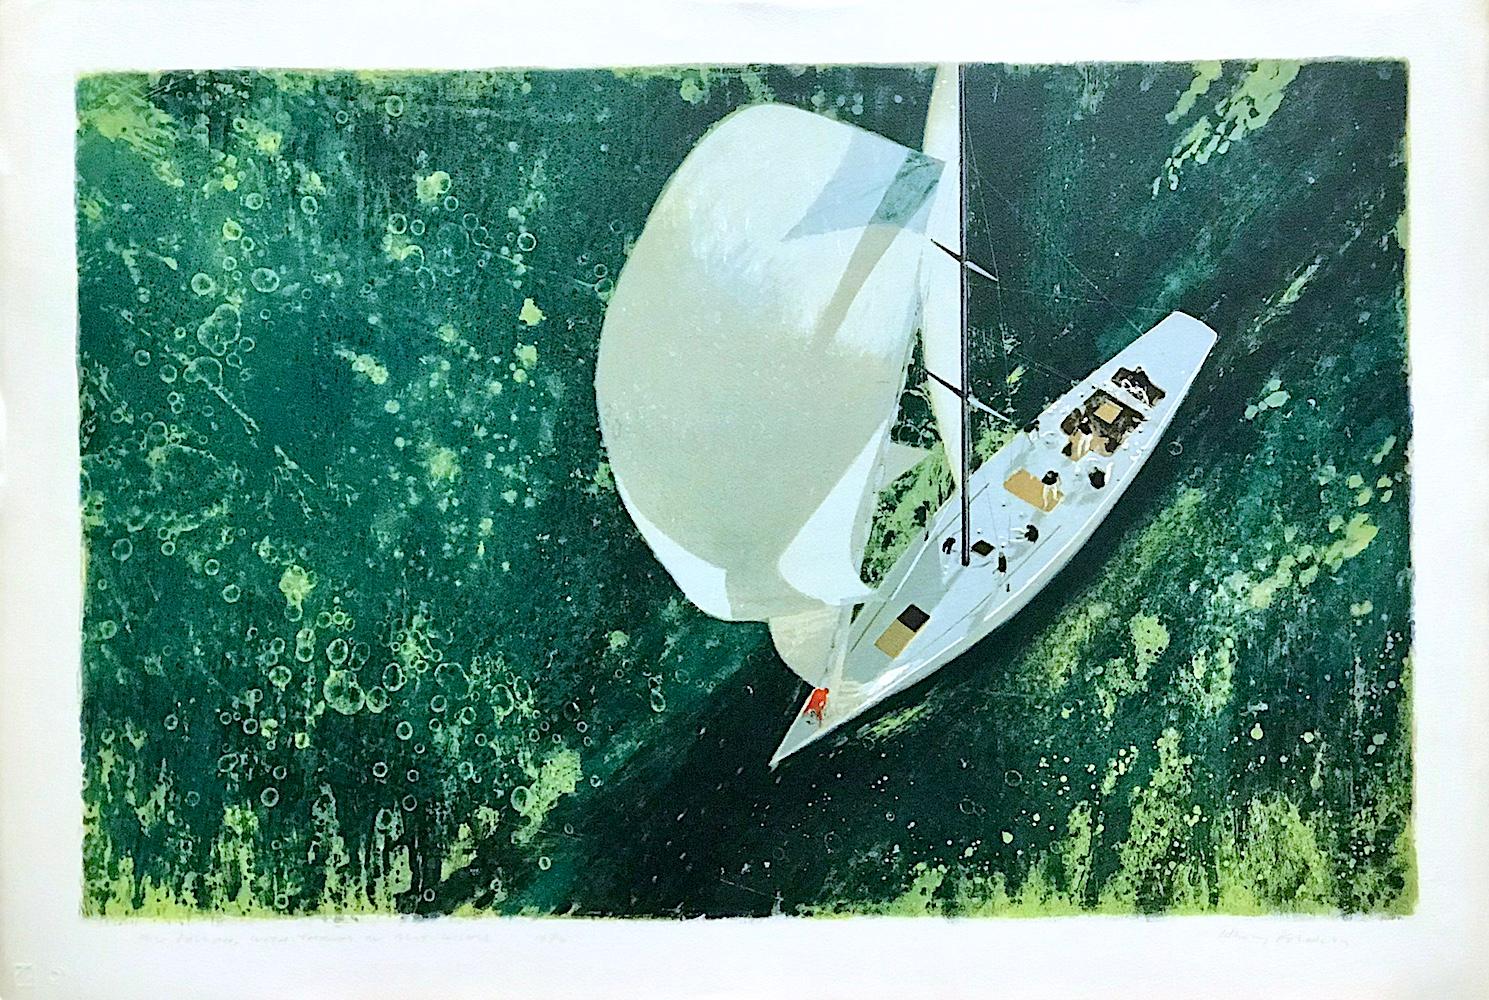 Henry Koehler Landscape Print - CONSTELLATION BELOW Signed Lithograph, Sailing, Cutter (boat), Nautical Art